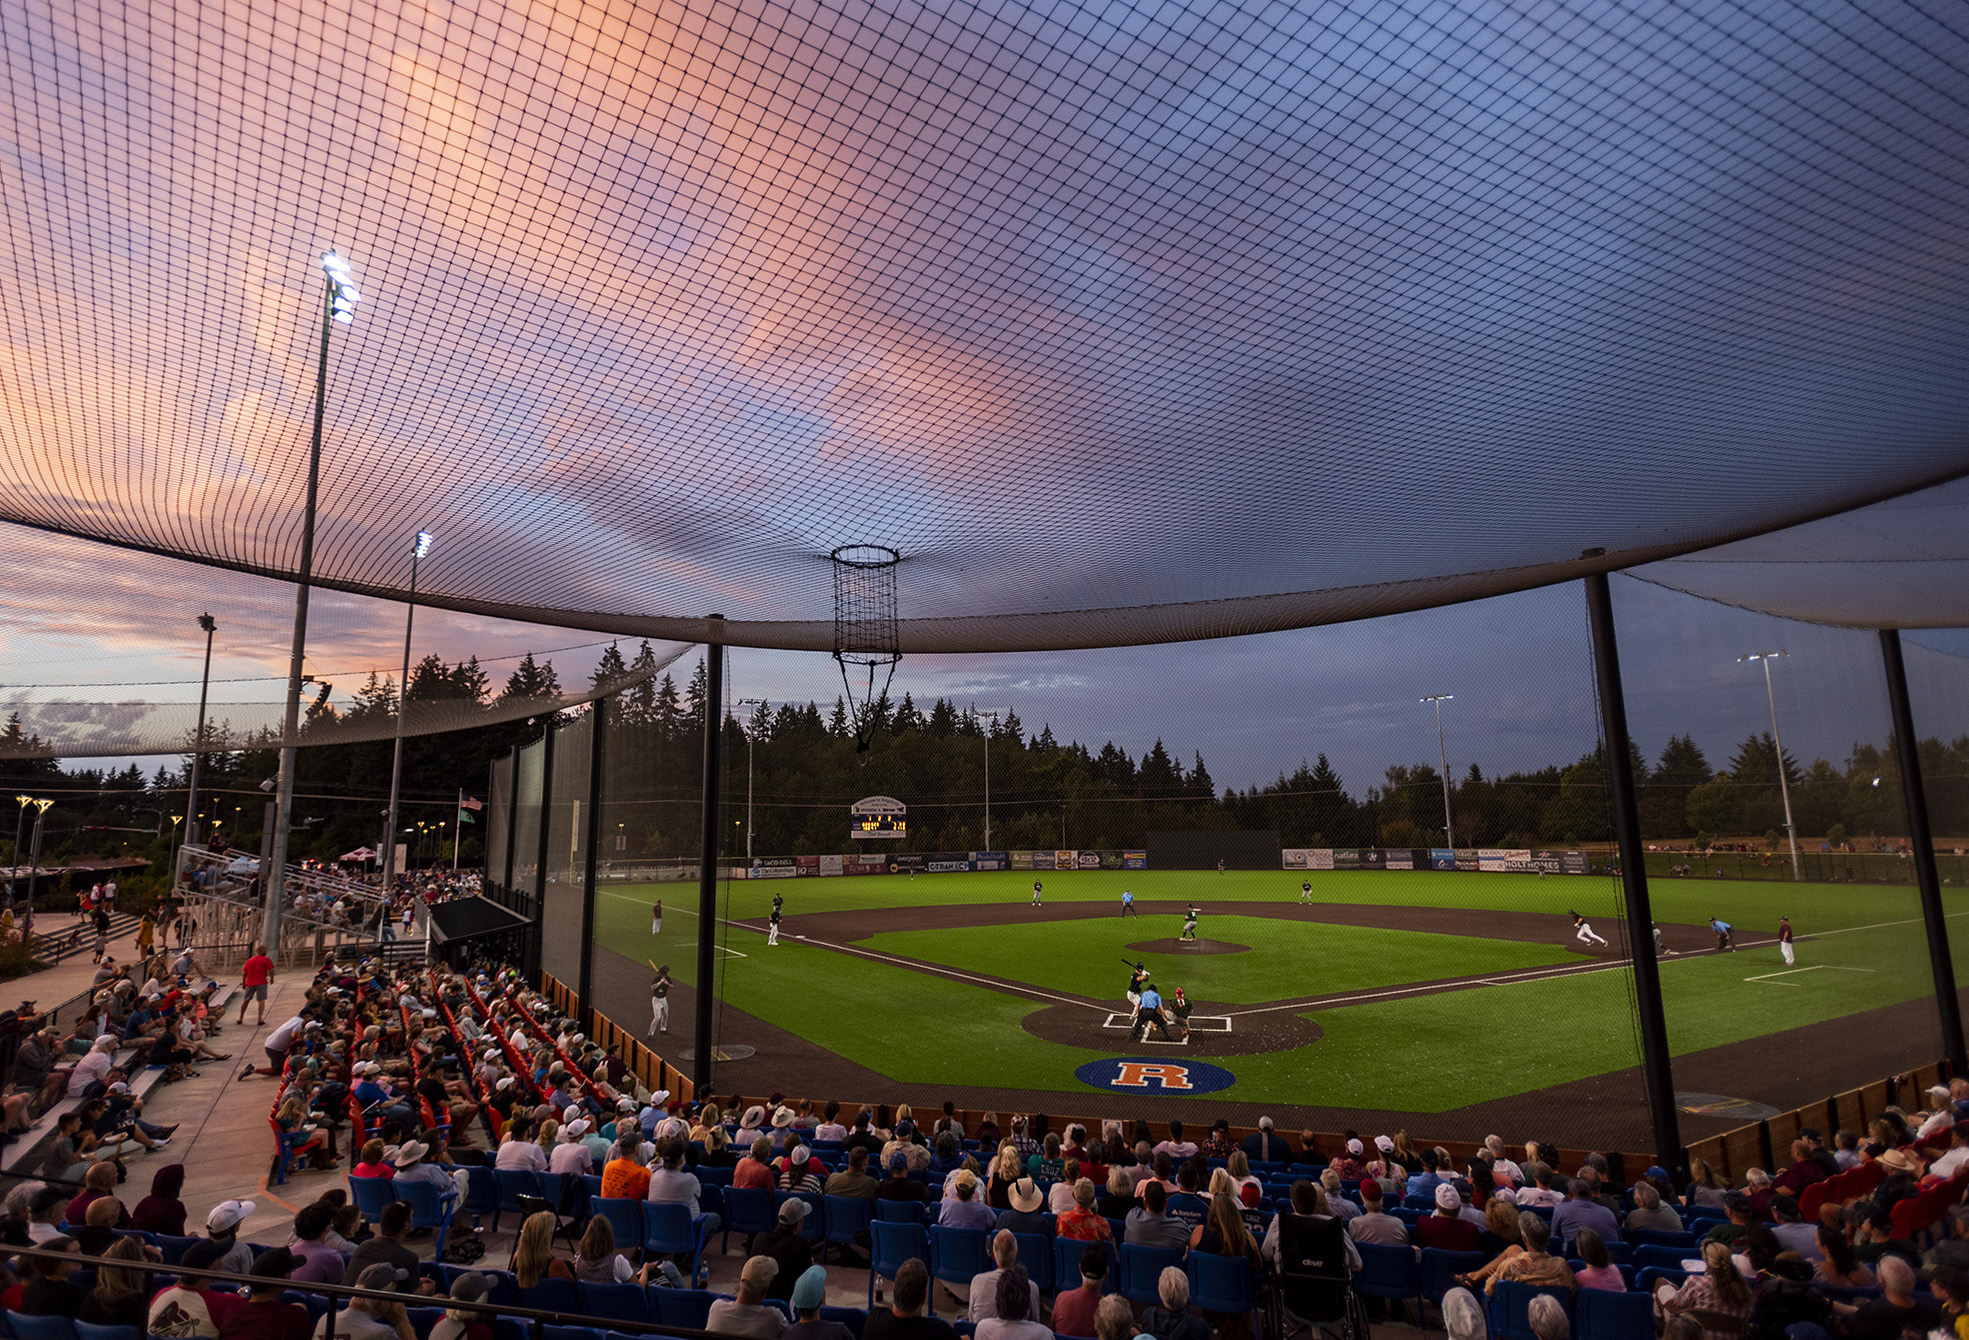 The sun sets over the Ridgefield Outdoor Recreation Complex on Tuesday, Aug. 9, 2022, during a playoff game between the Ridgefield Raptors and the Portland Pickles.